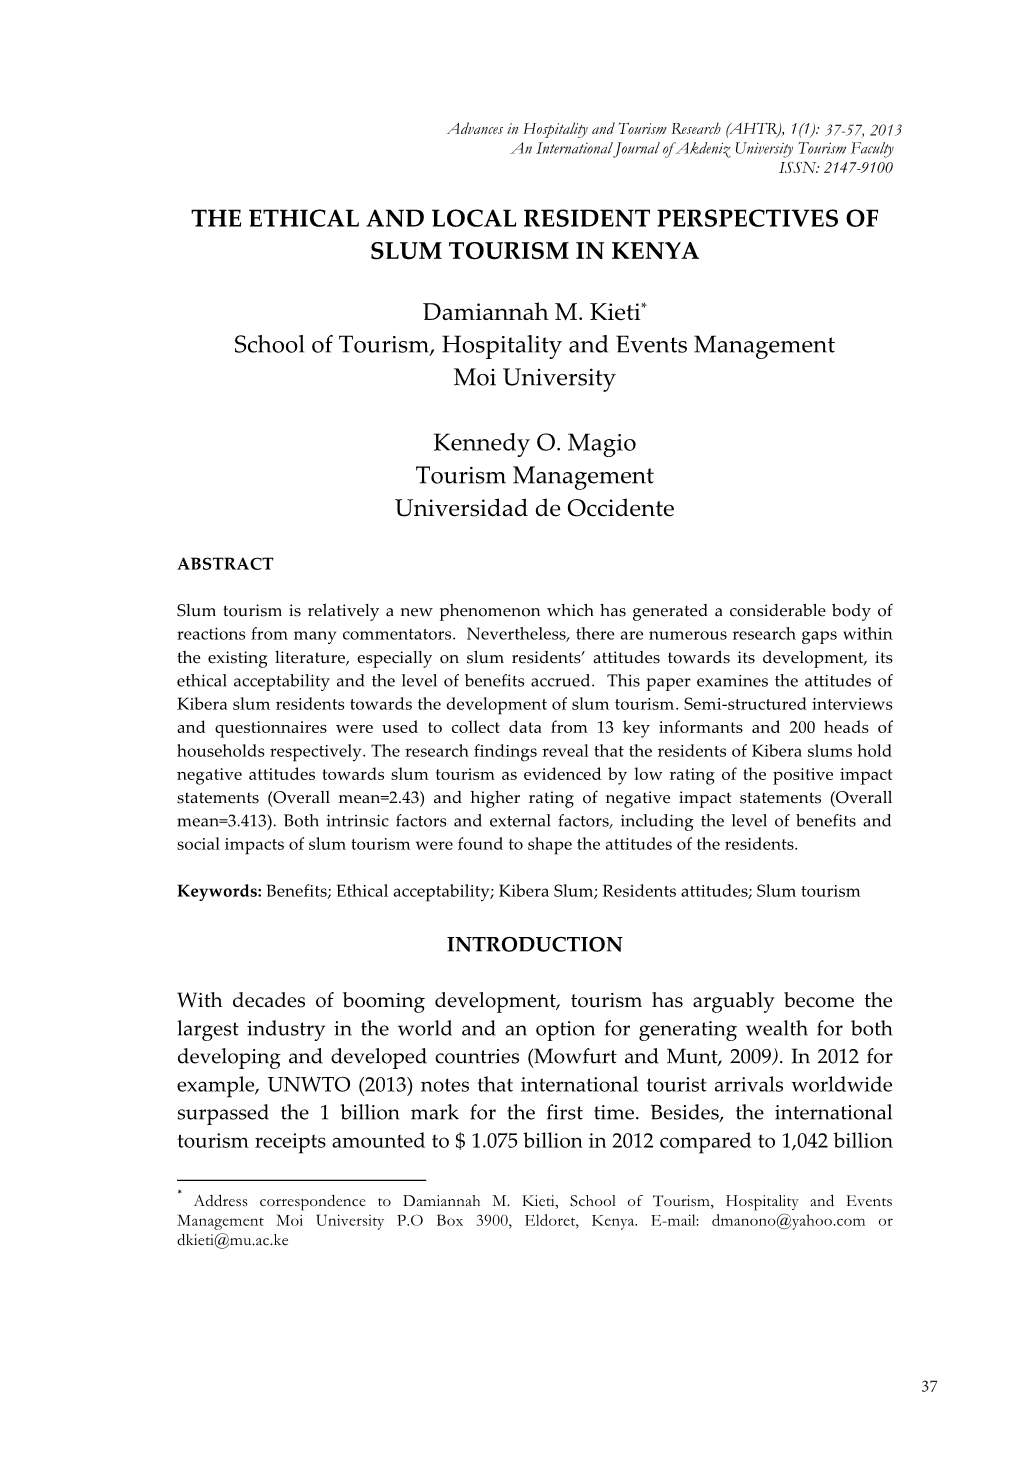 The Ethical and Local Resident Perspectives of Slum Tourism in Kenya